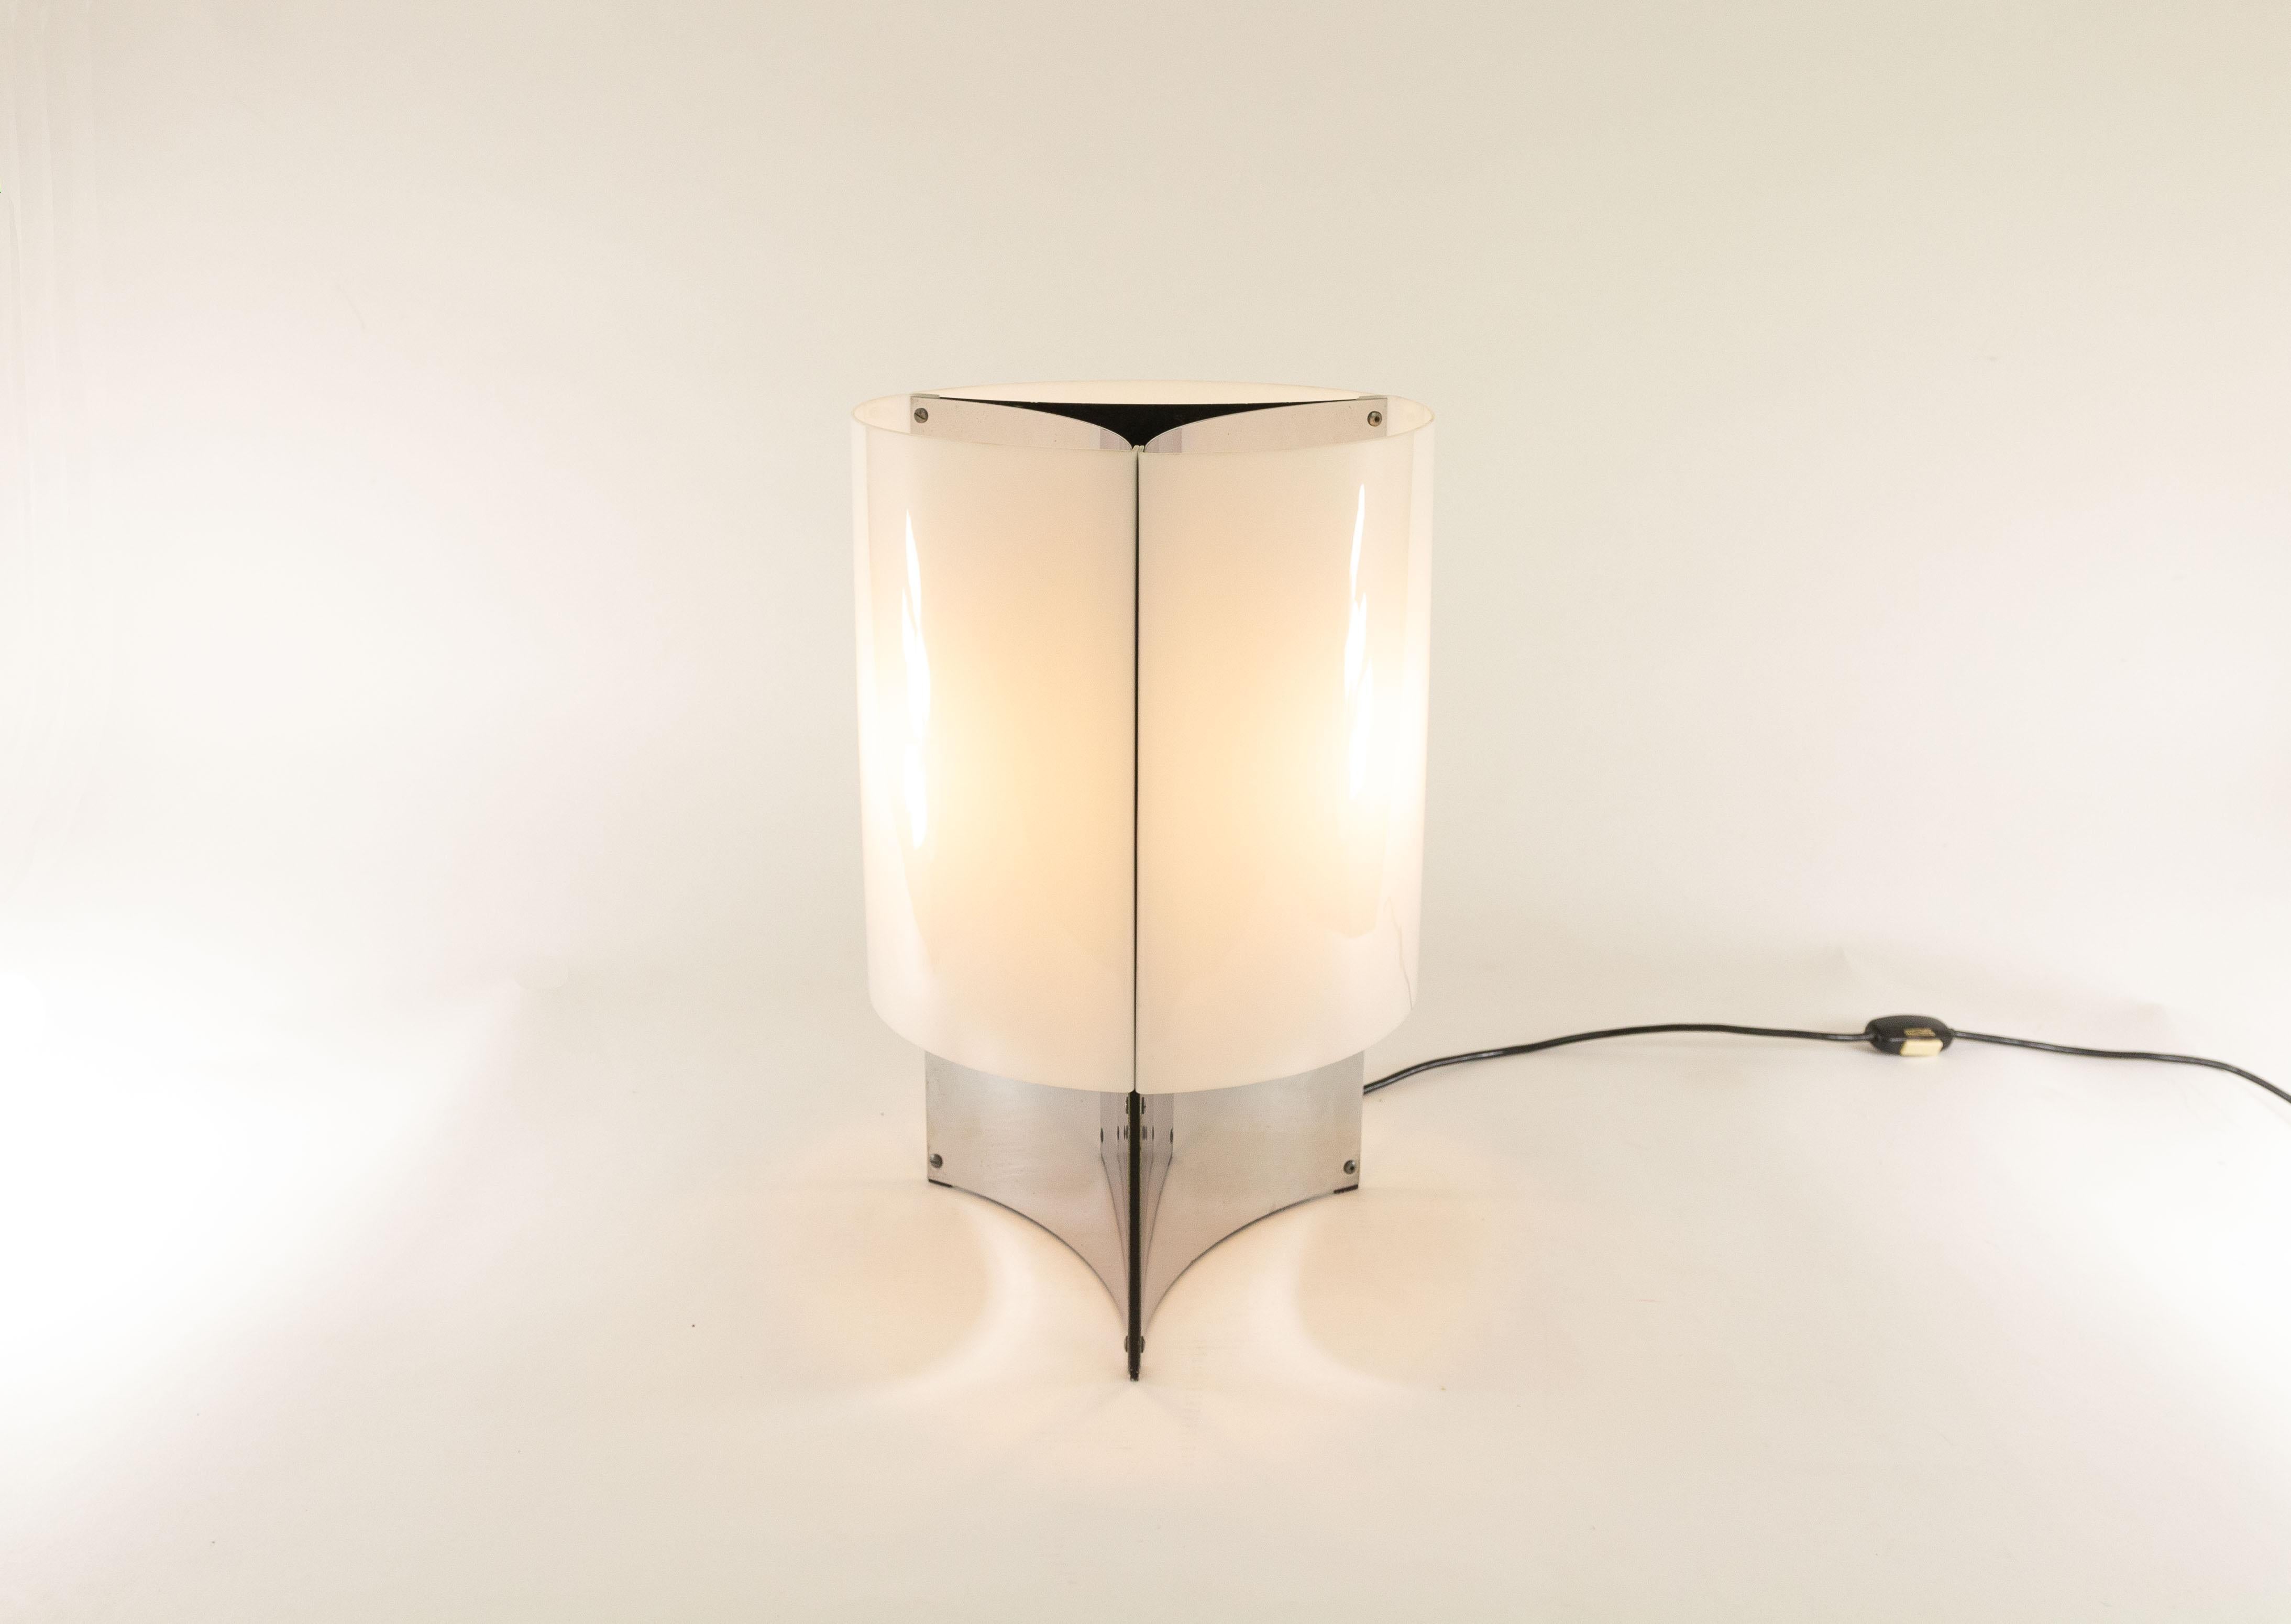 This elegant lamp model No. 526/P was designed in 1965 by Massimo Vignelli for Italian lighting manufacturer Arteluce.

Model No. 526 is a table lamp with a base that consists of three concave chromed sheets. This base is covered by white Perspex